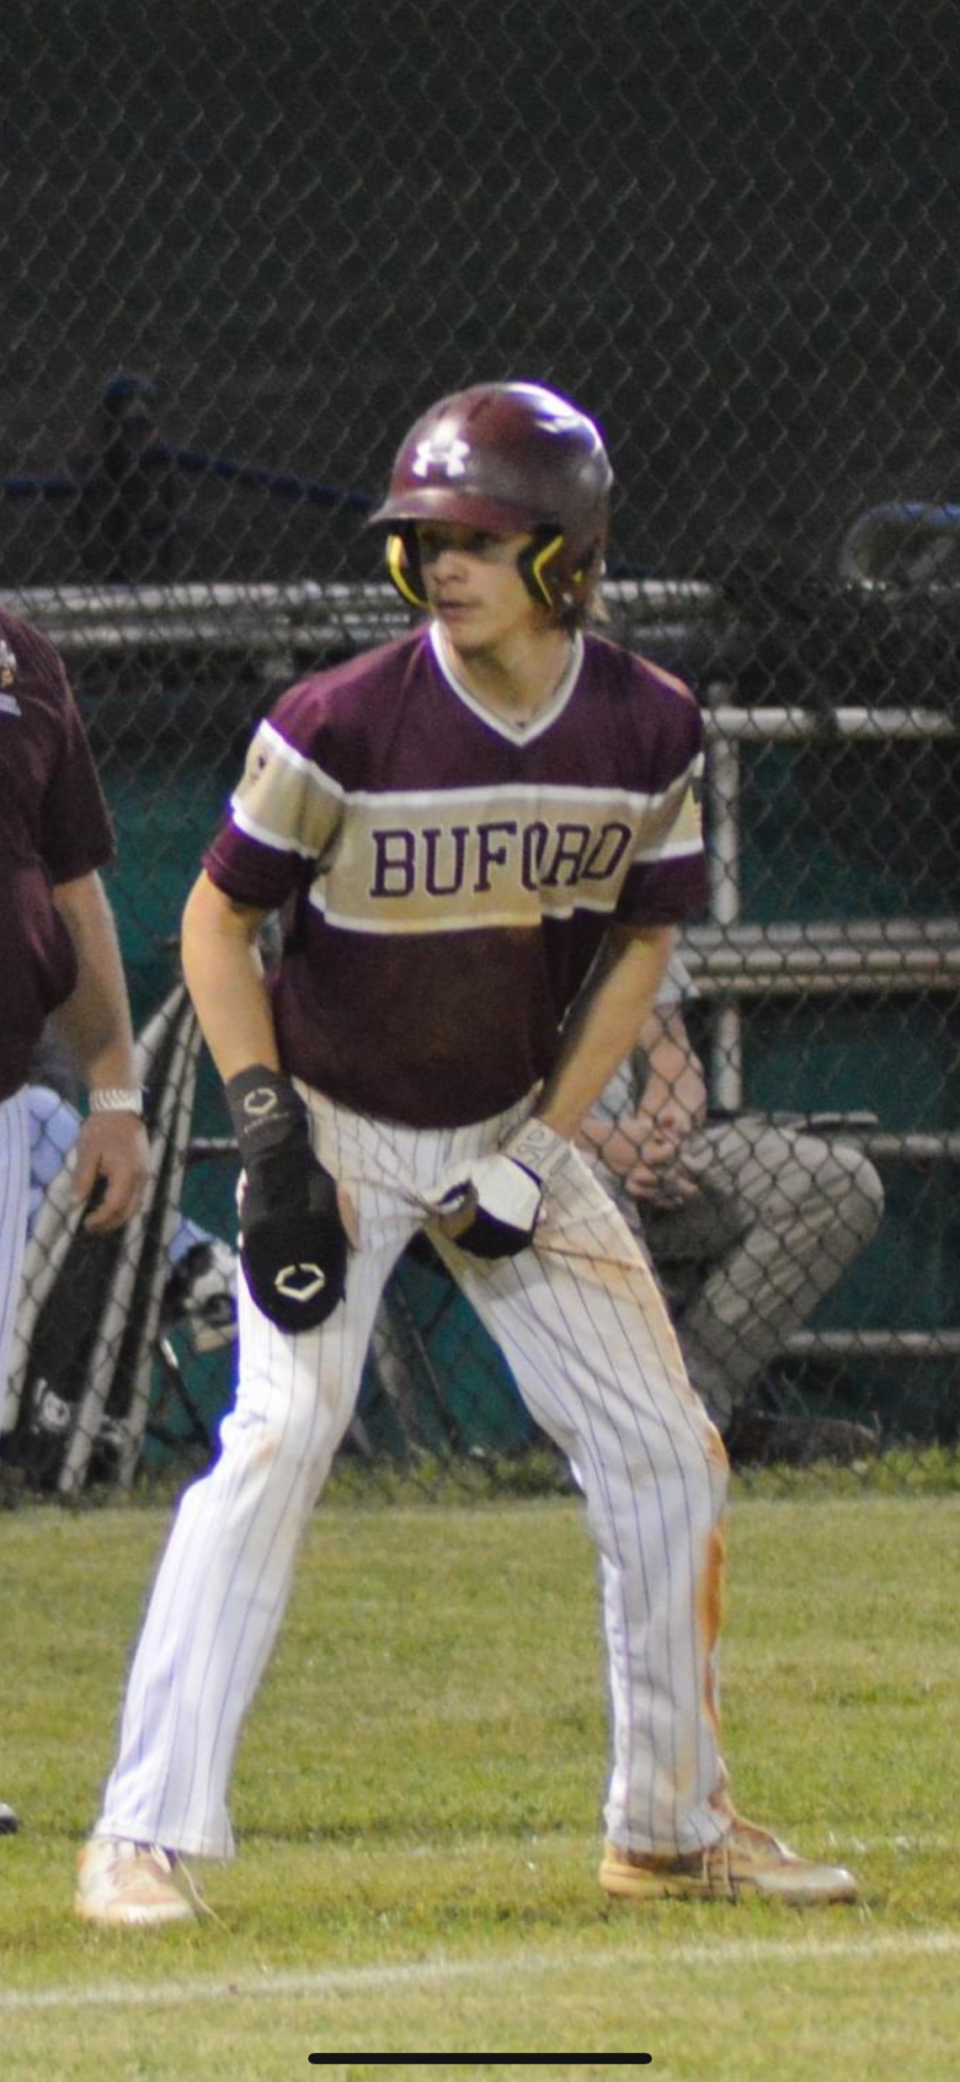 Ewing, a senior, leads Buford in batting average and on-base percentage.